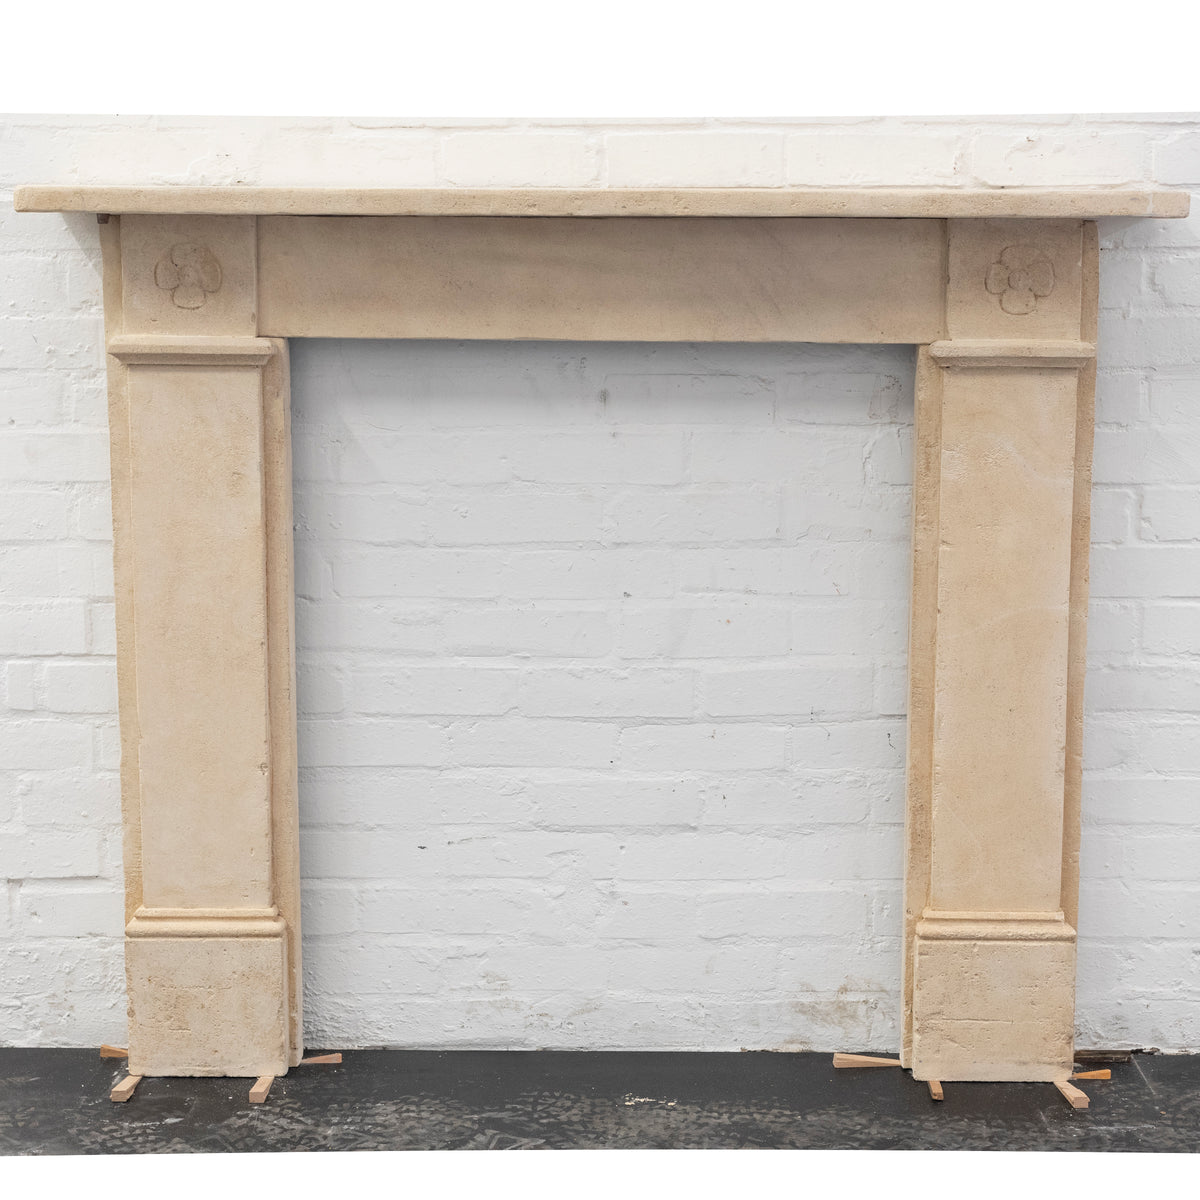 Antique Bath Stone Fire Surround with Carved Florals | The Architectural Forum